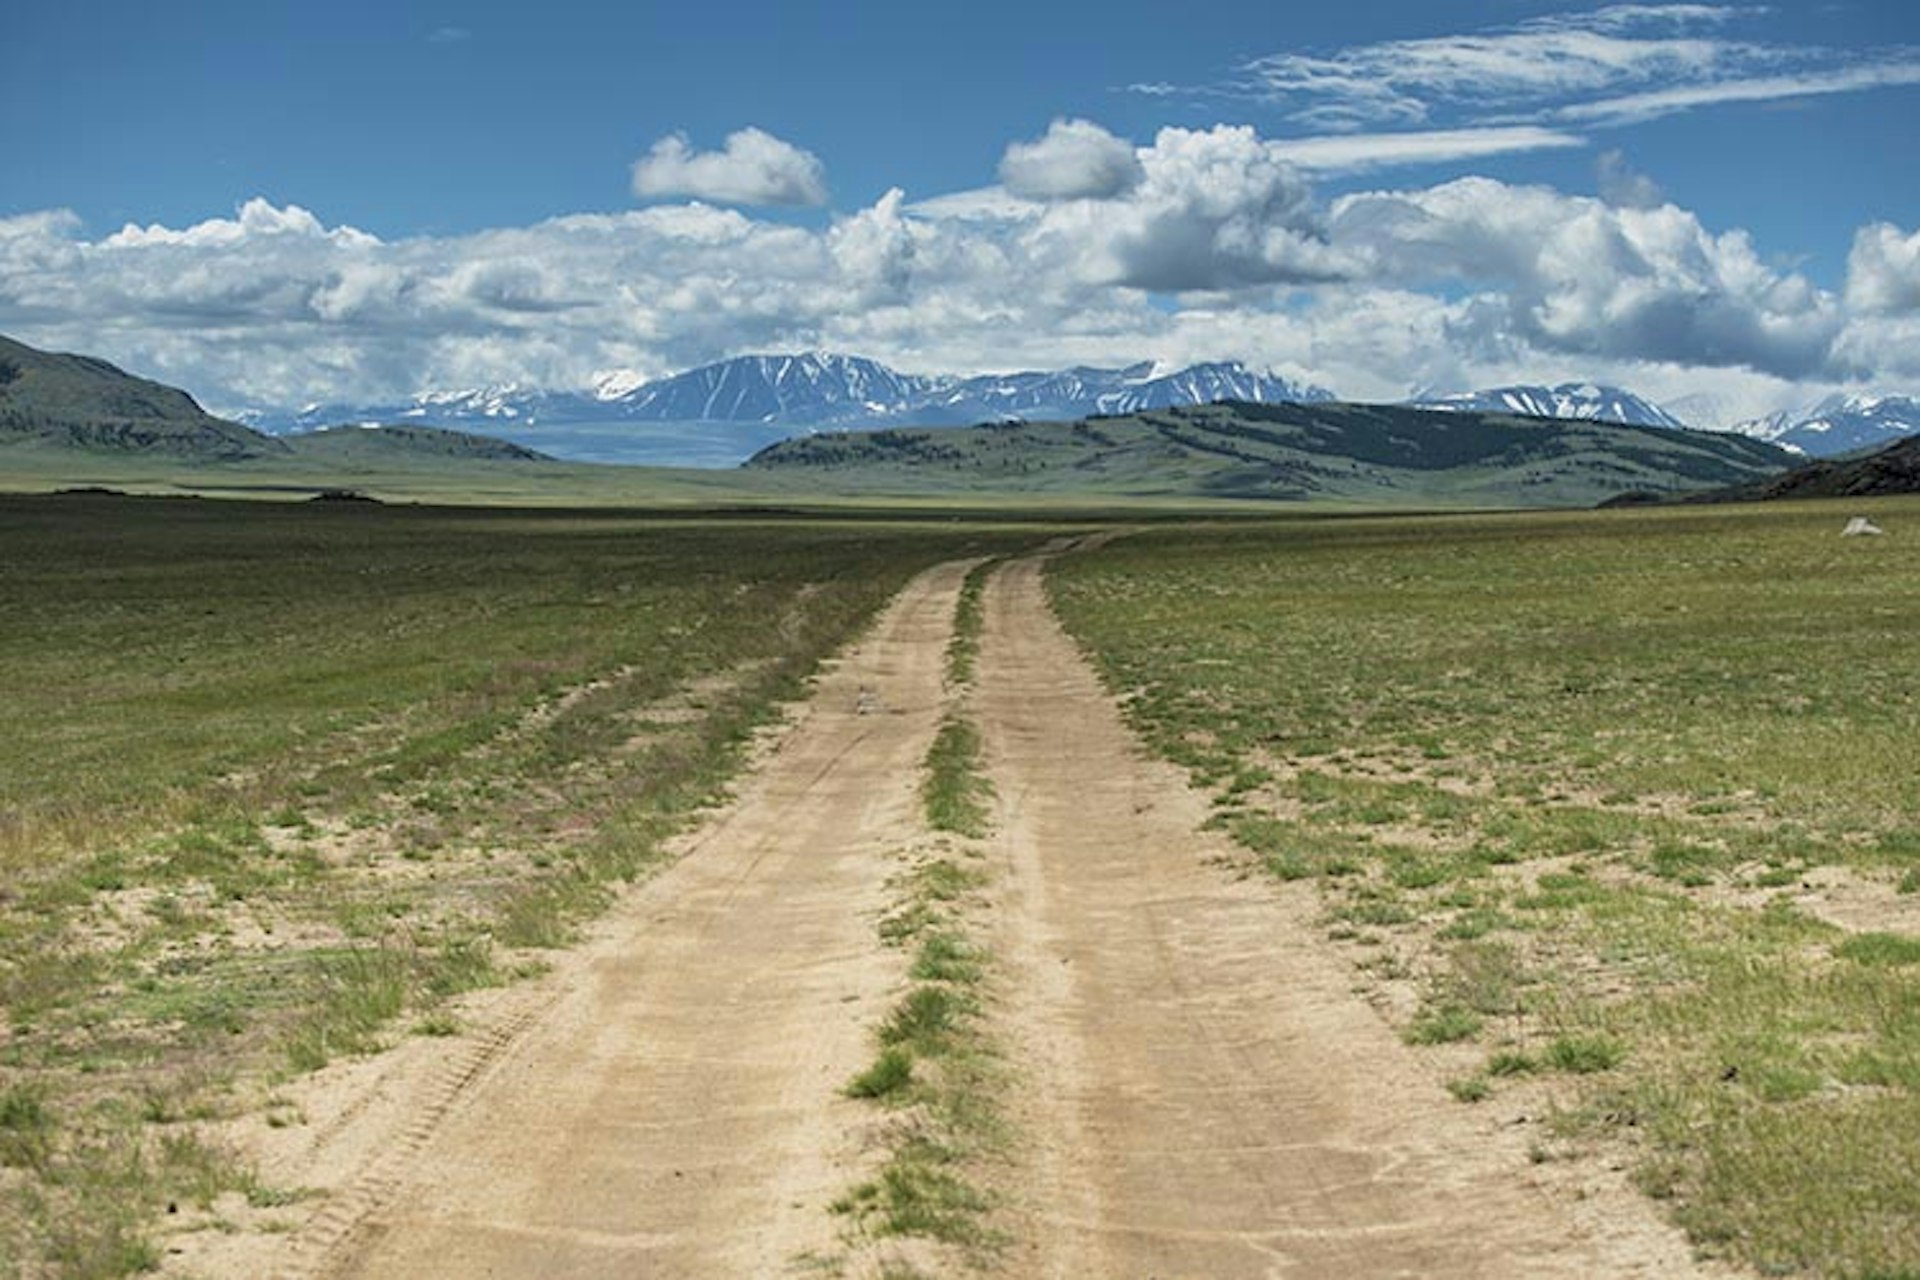 The road to nowhere: dirt track to the Altai. Image by David Baxendale / Lonely Planet